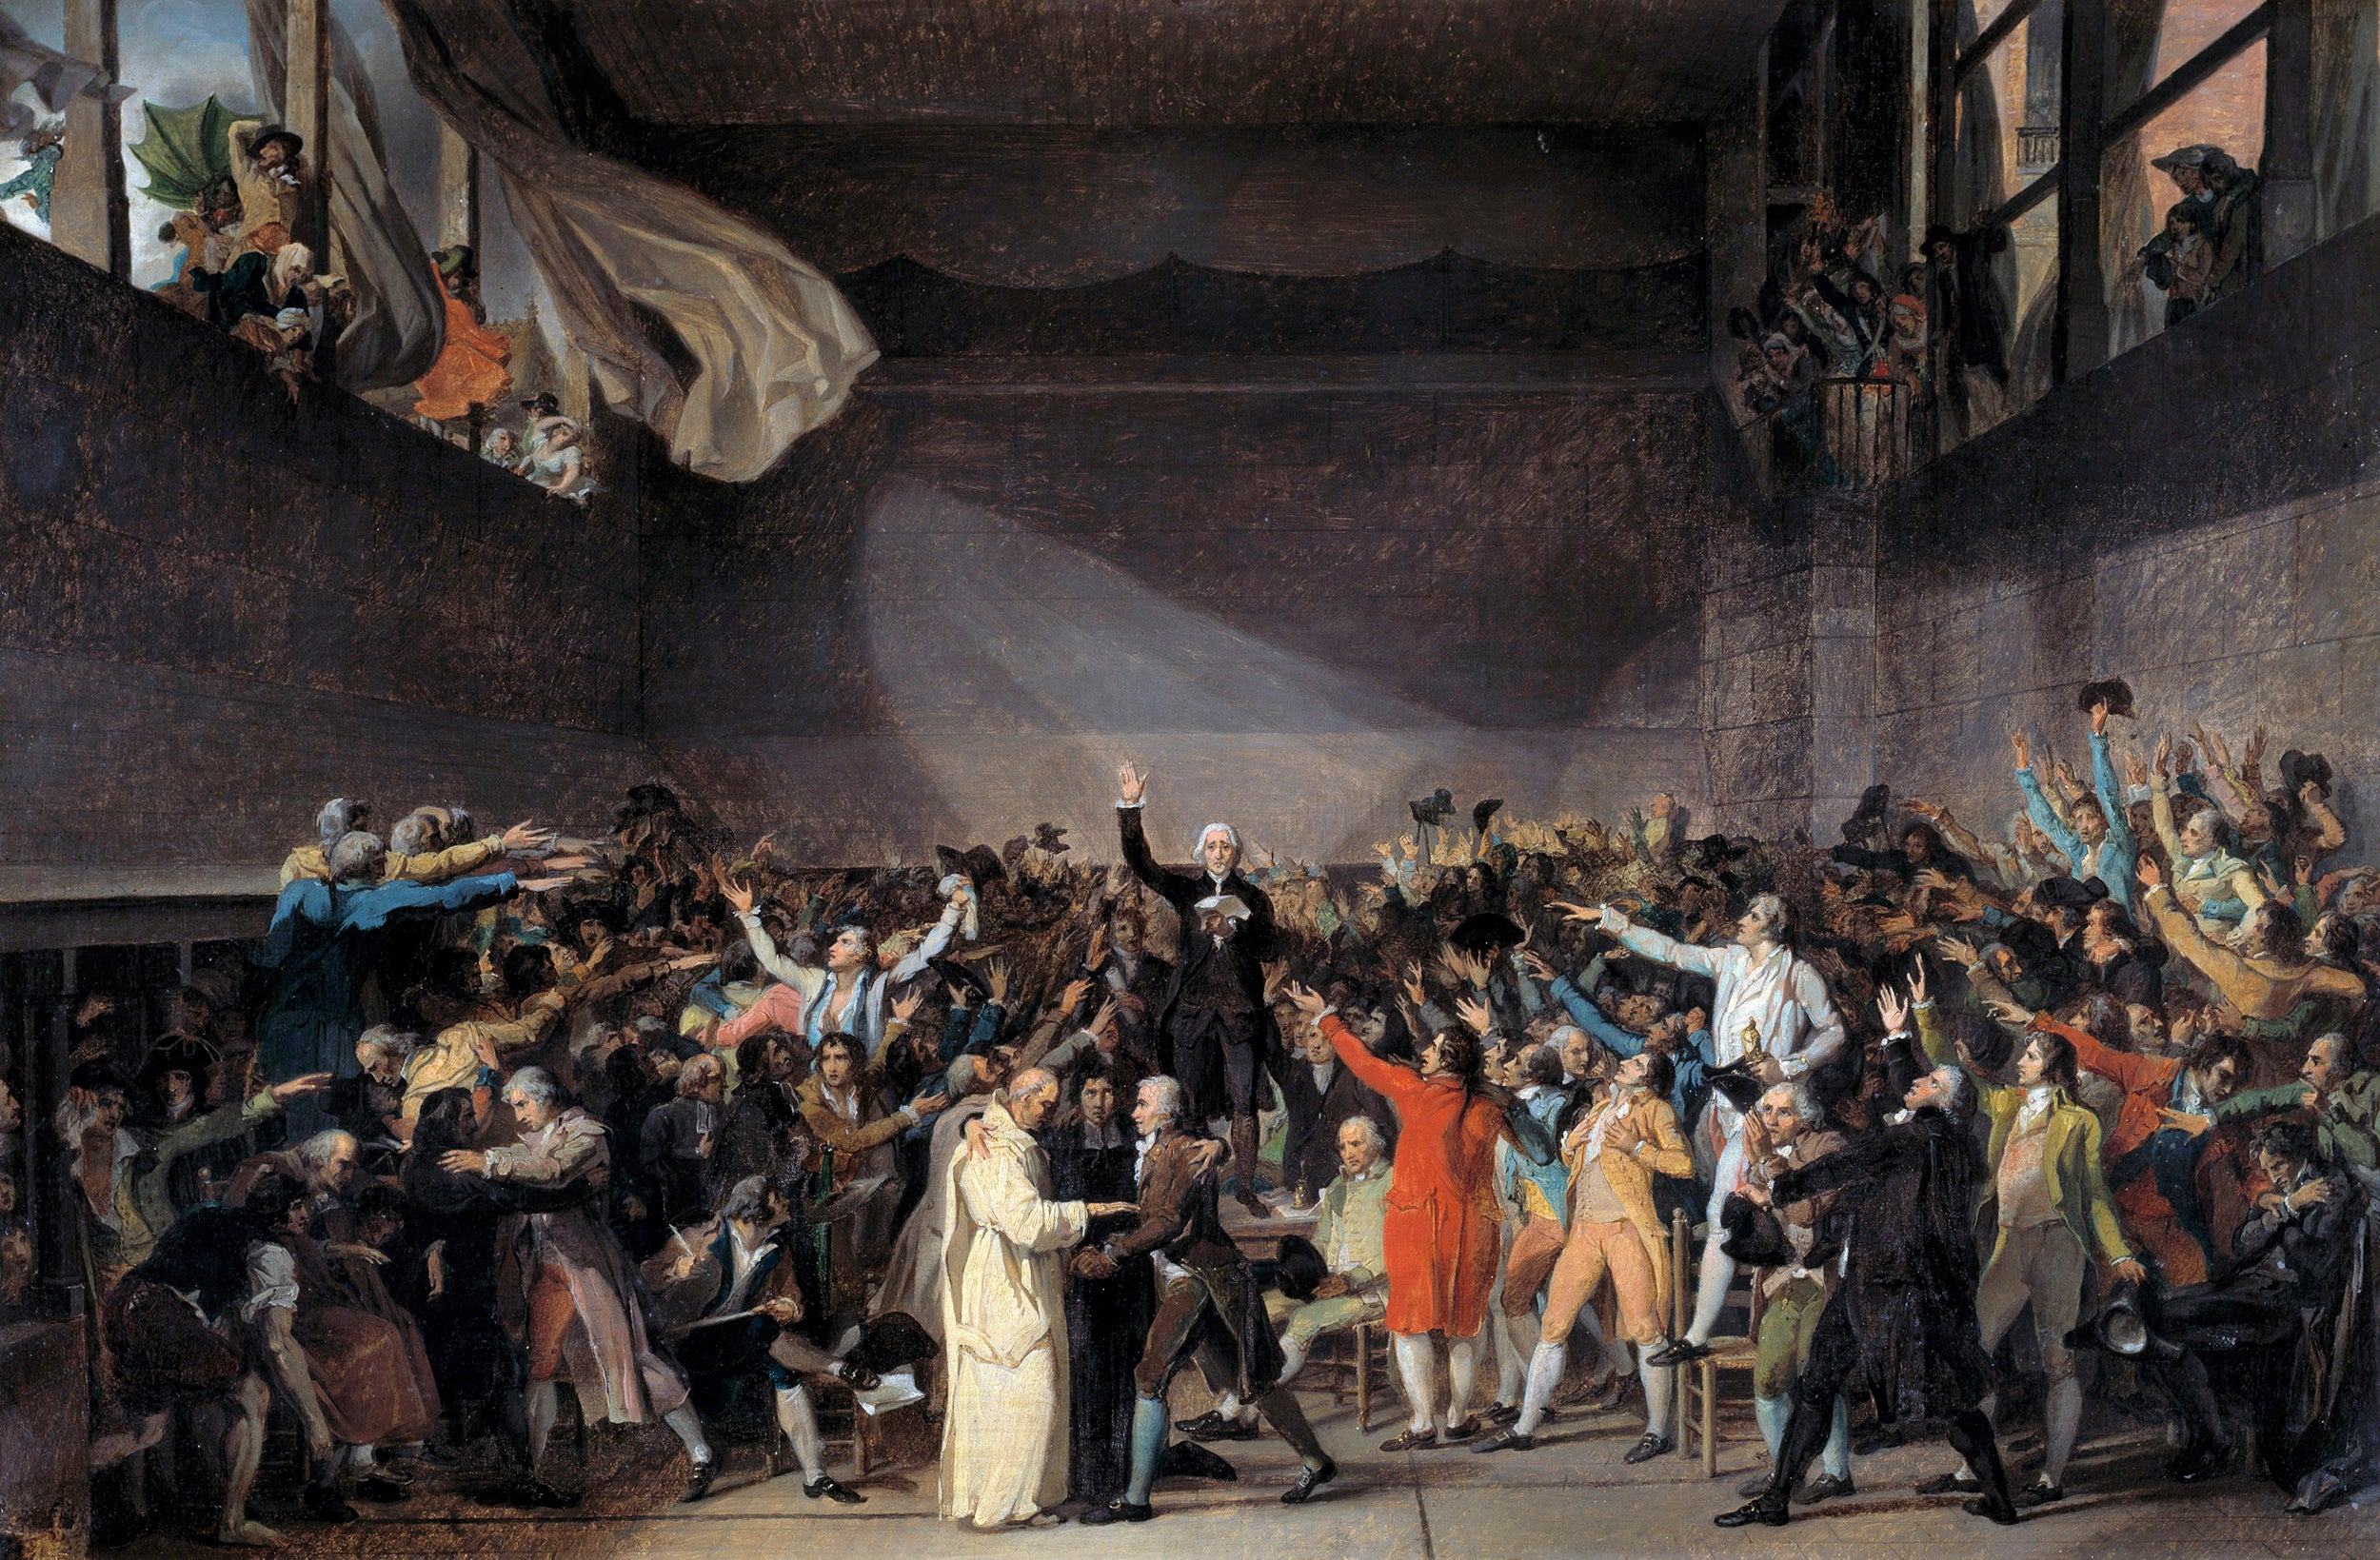 The French Revolution: is the labelling of modern-day Western 'democracy' misleading?